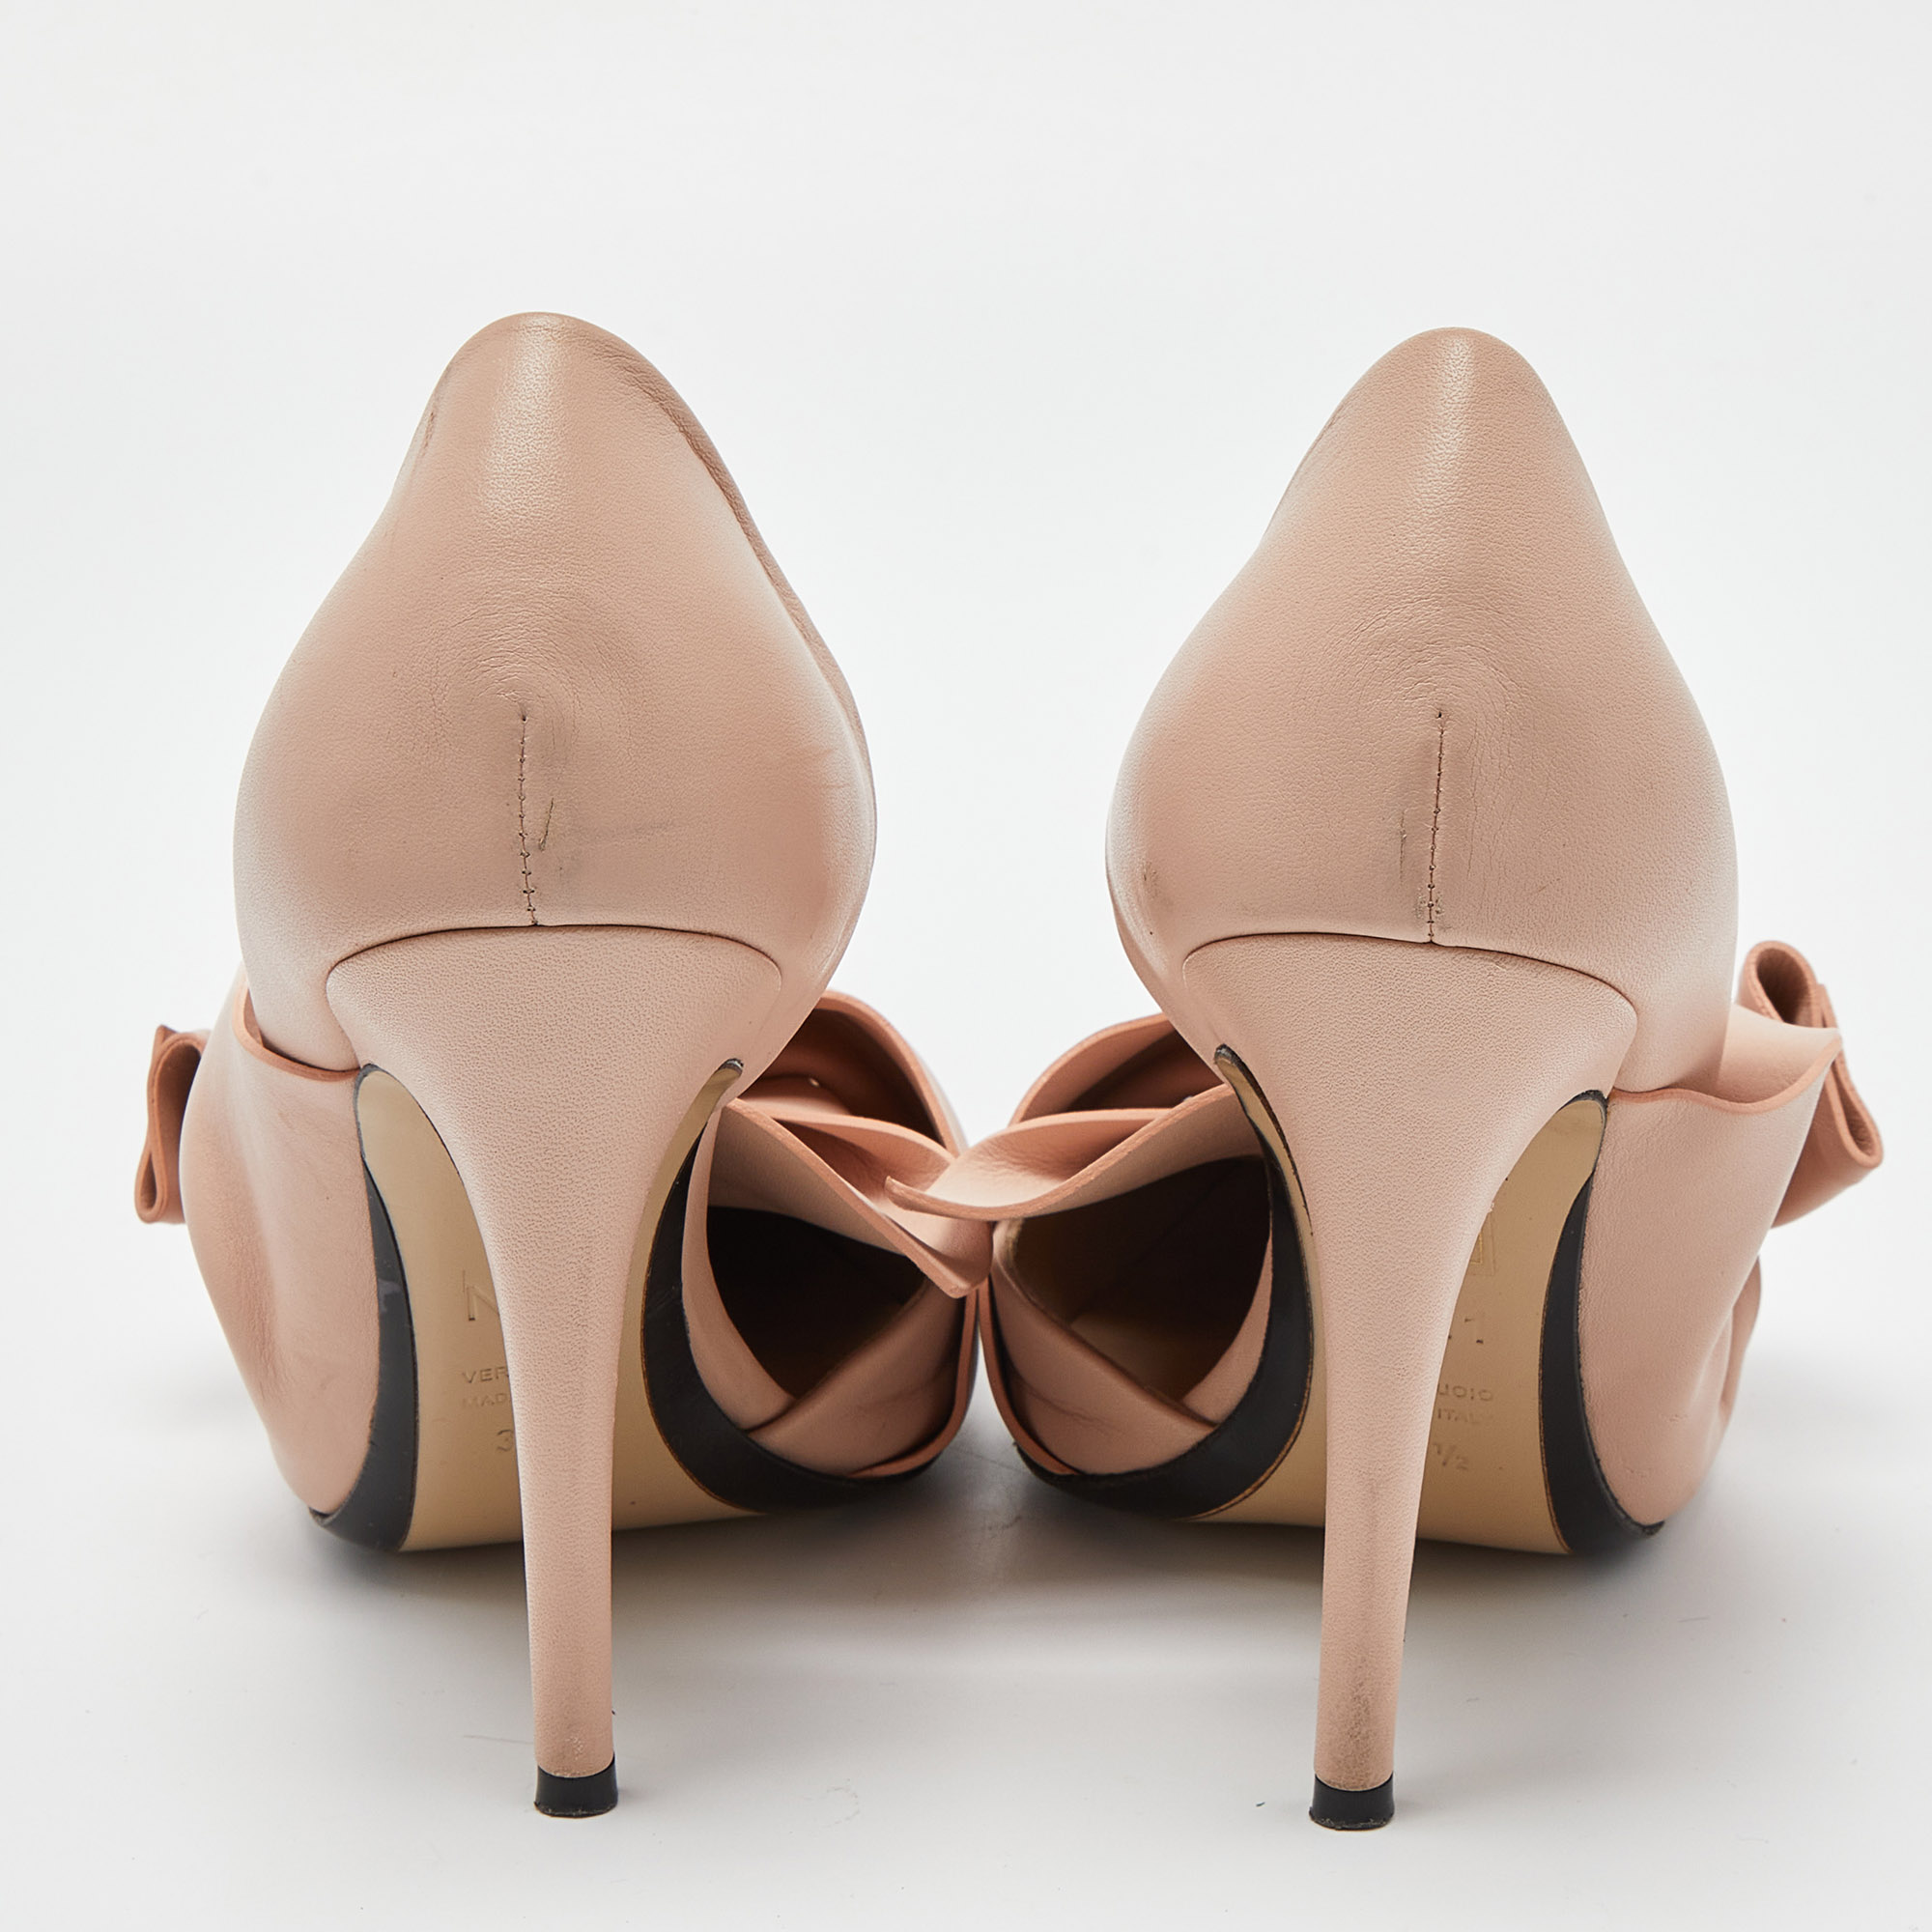 N°21 Light Pink Leather Knot D'Orsay Pumps Size 39.5